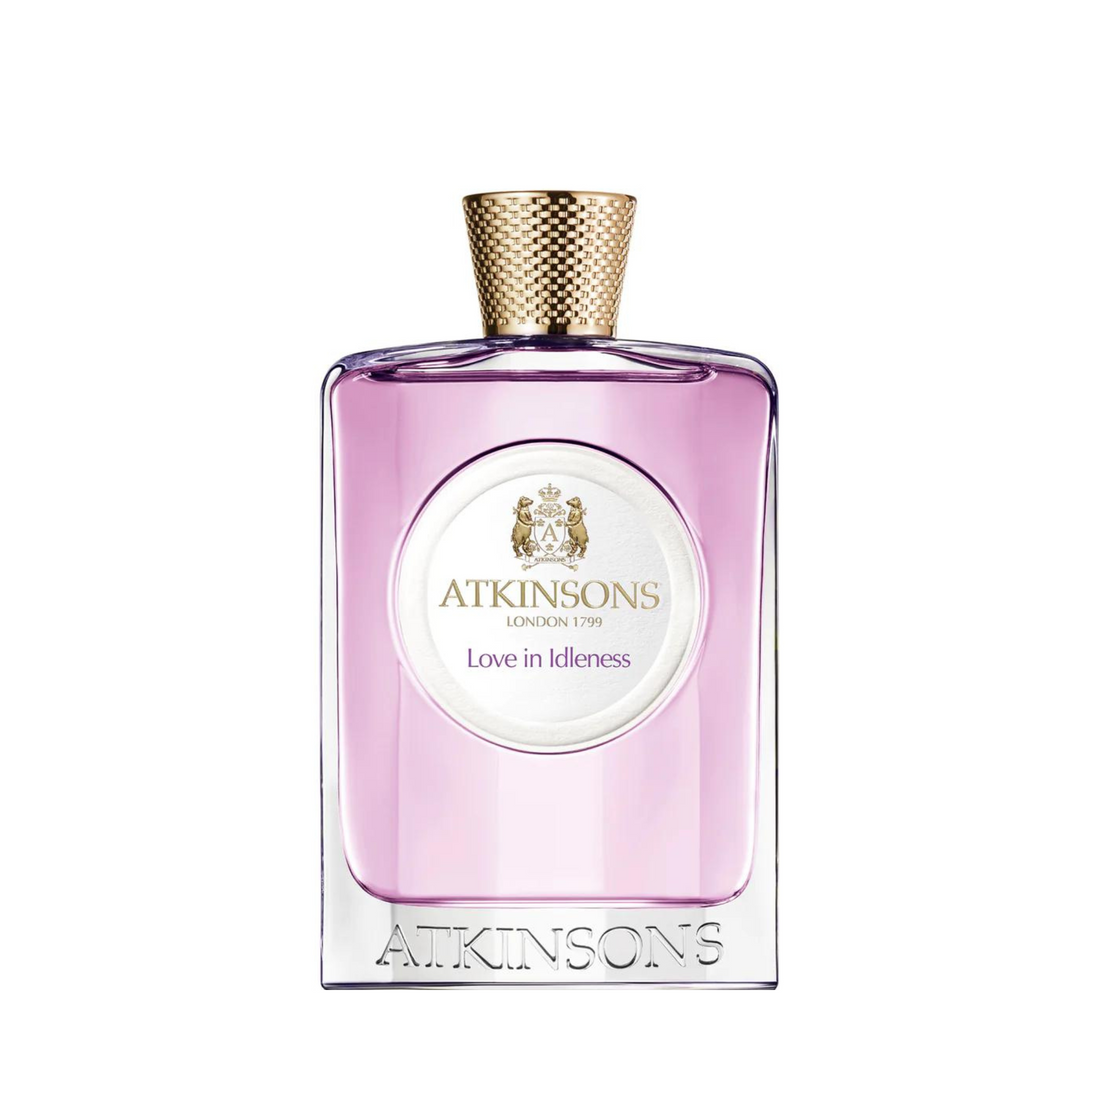 ATKINSONS LOVE IN LDDLENESS EDT